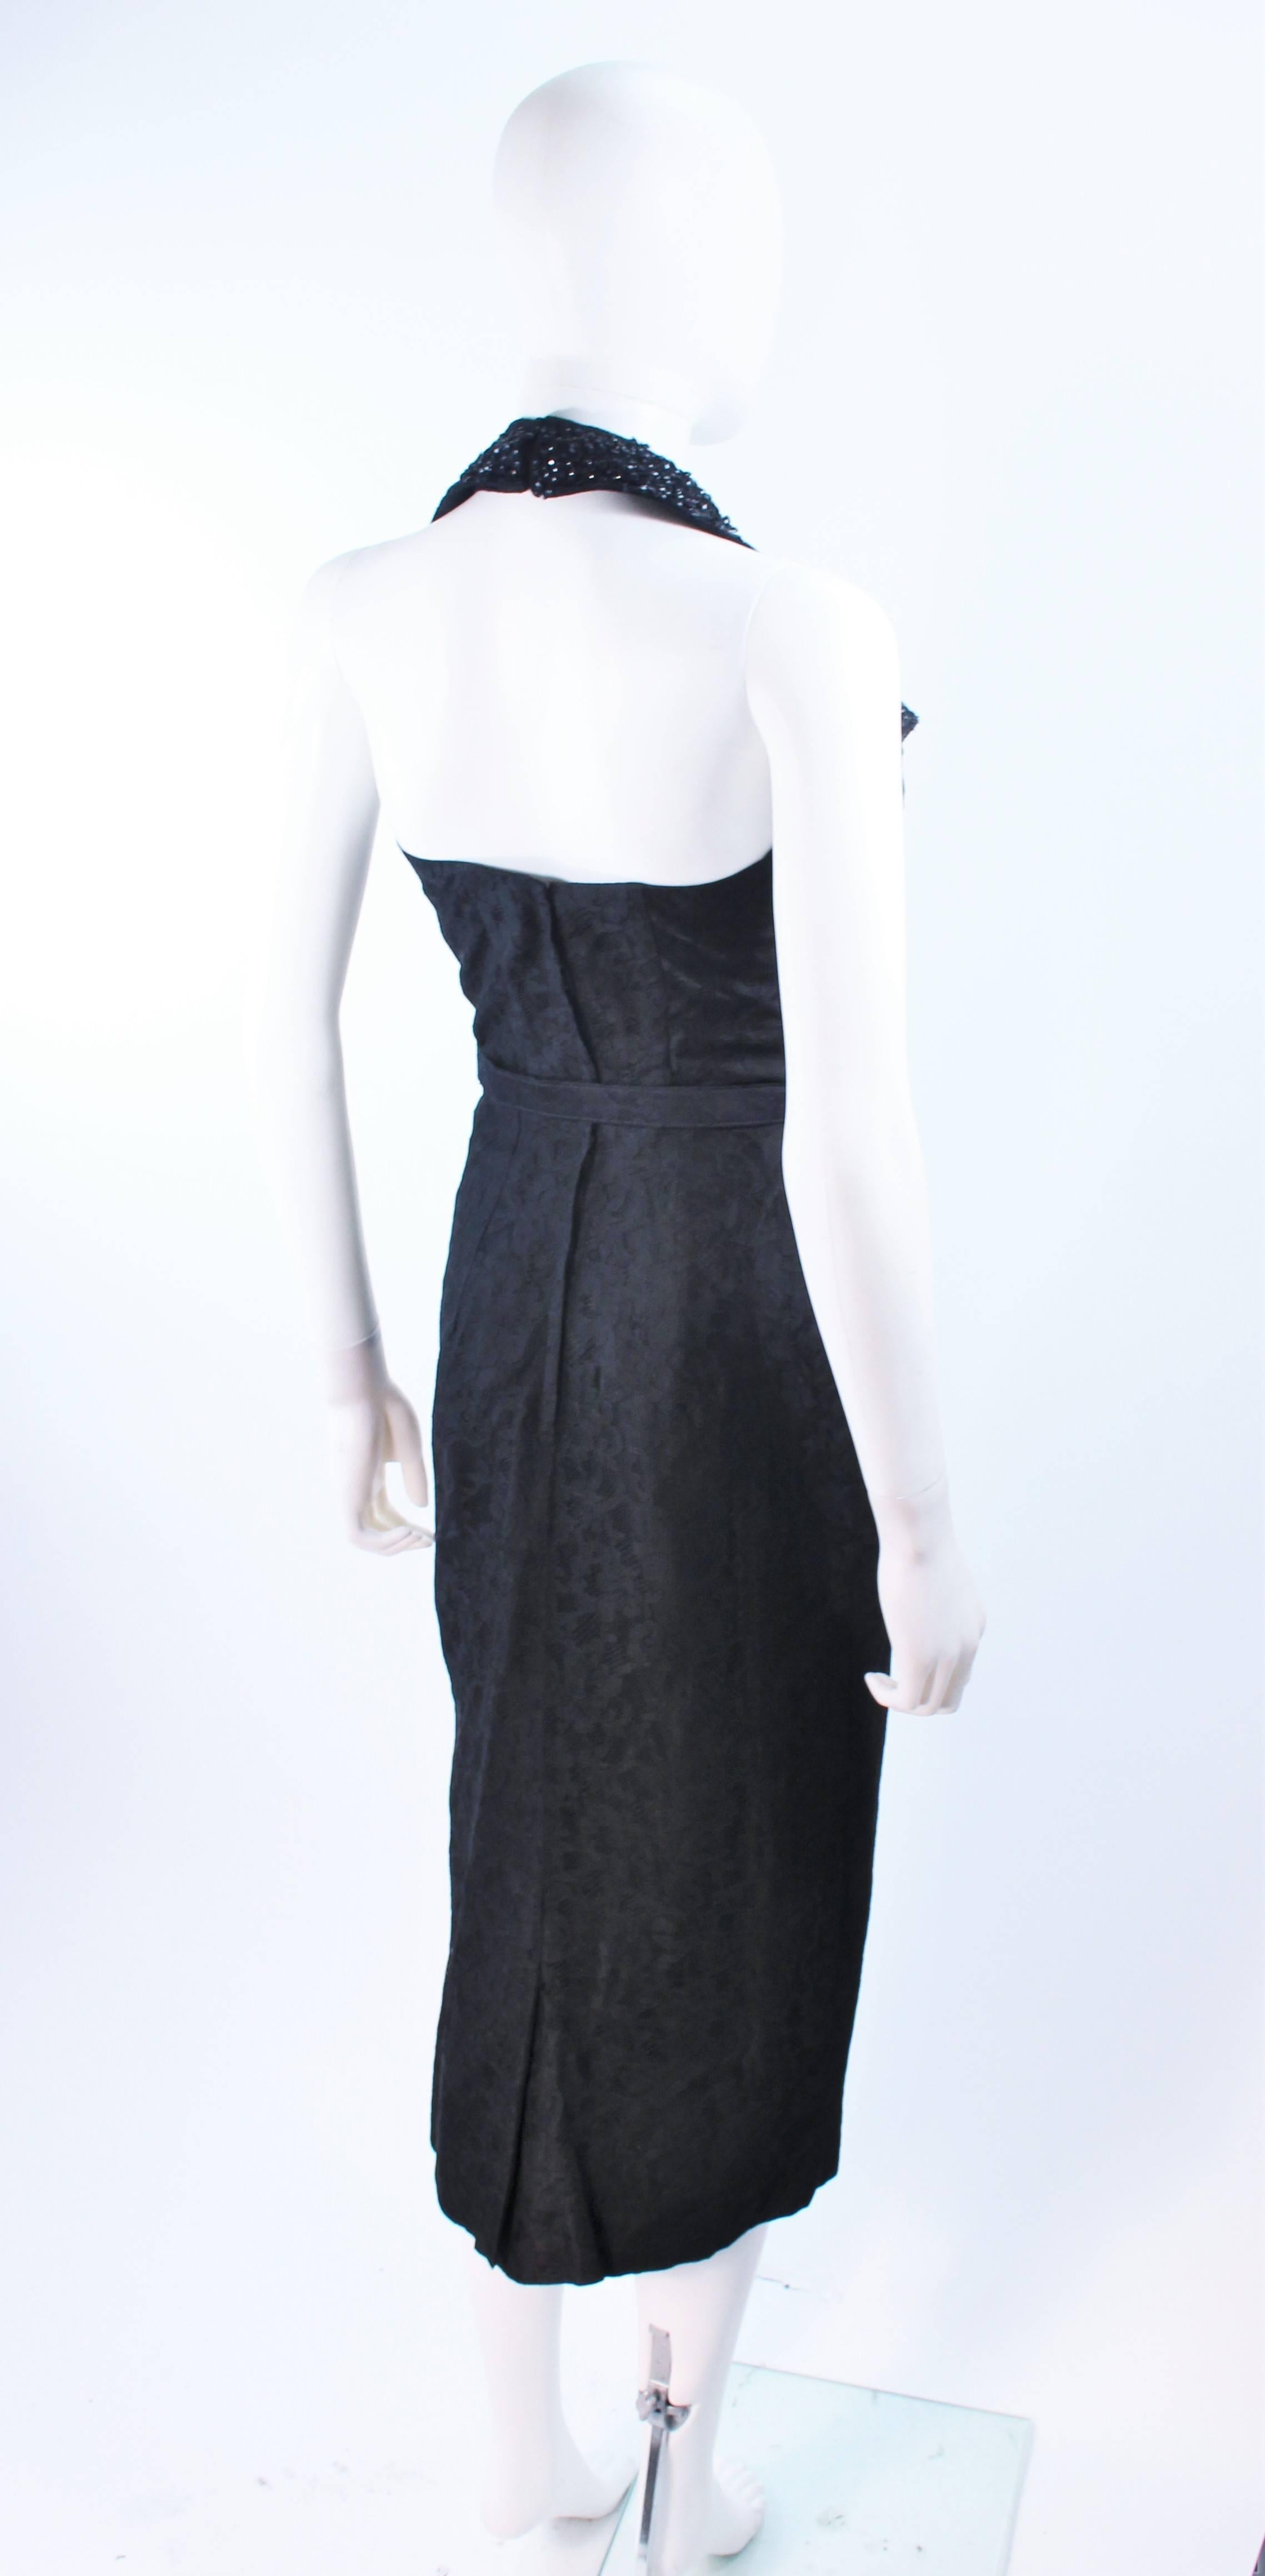 MIGUEL by Kenneth Johnson 1950's  Black Lace Cocktail Dress Sequin Collar Size 0 For Sale 3